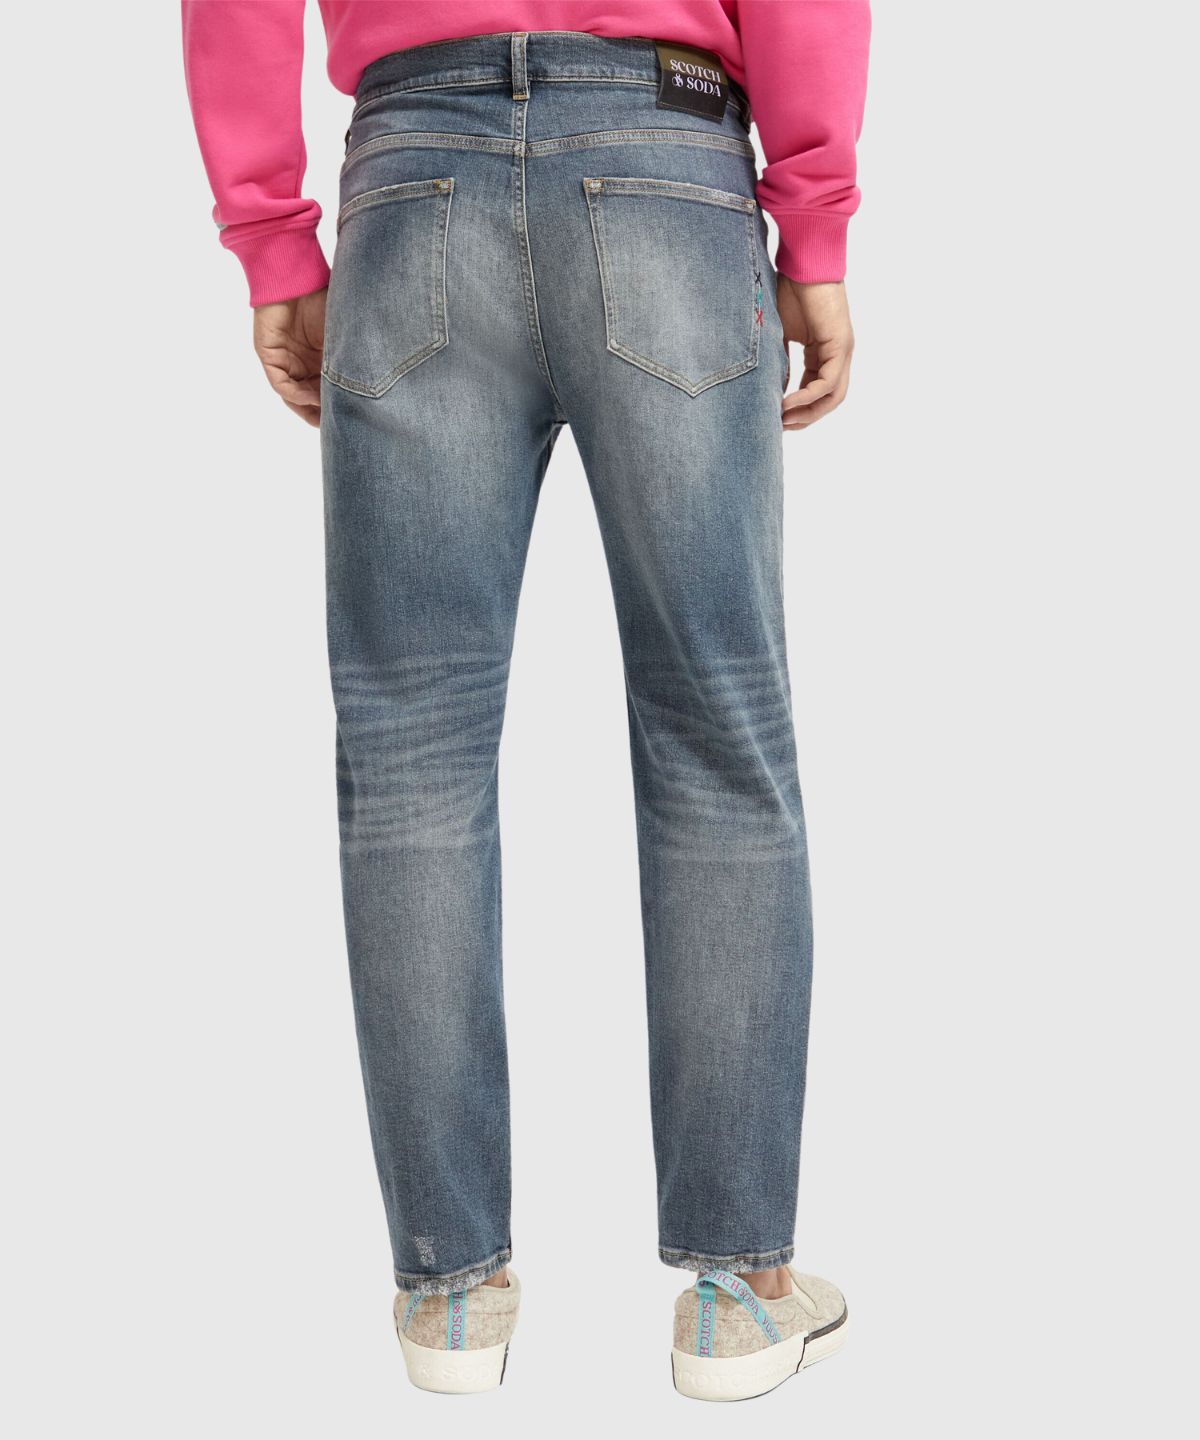 The Drop tapered jeans – Fresh Fade